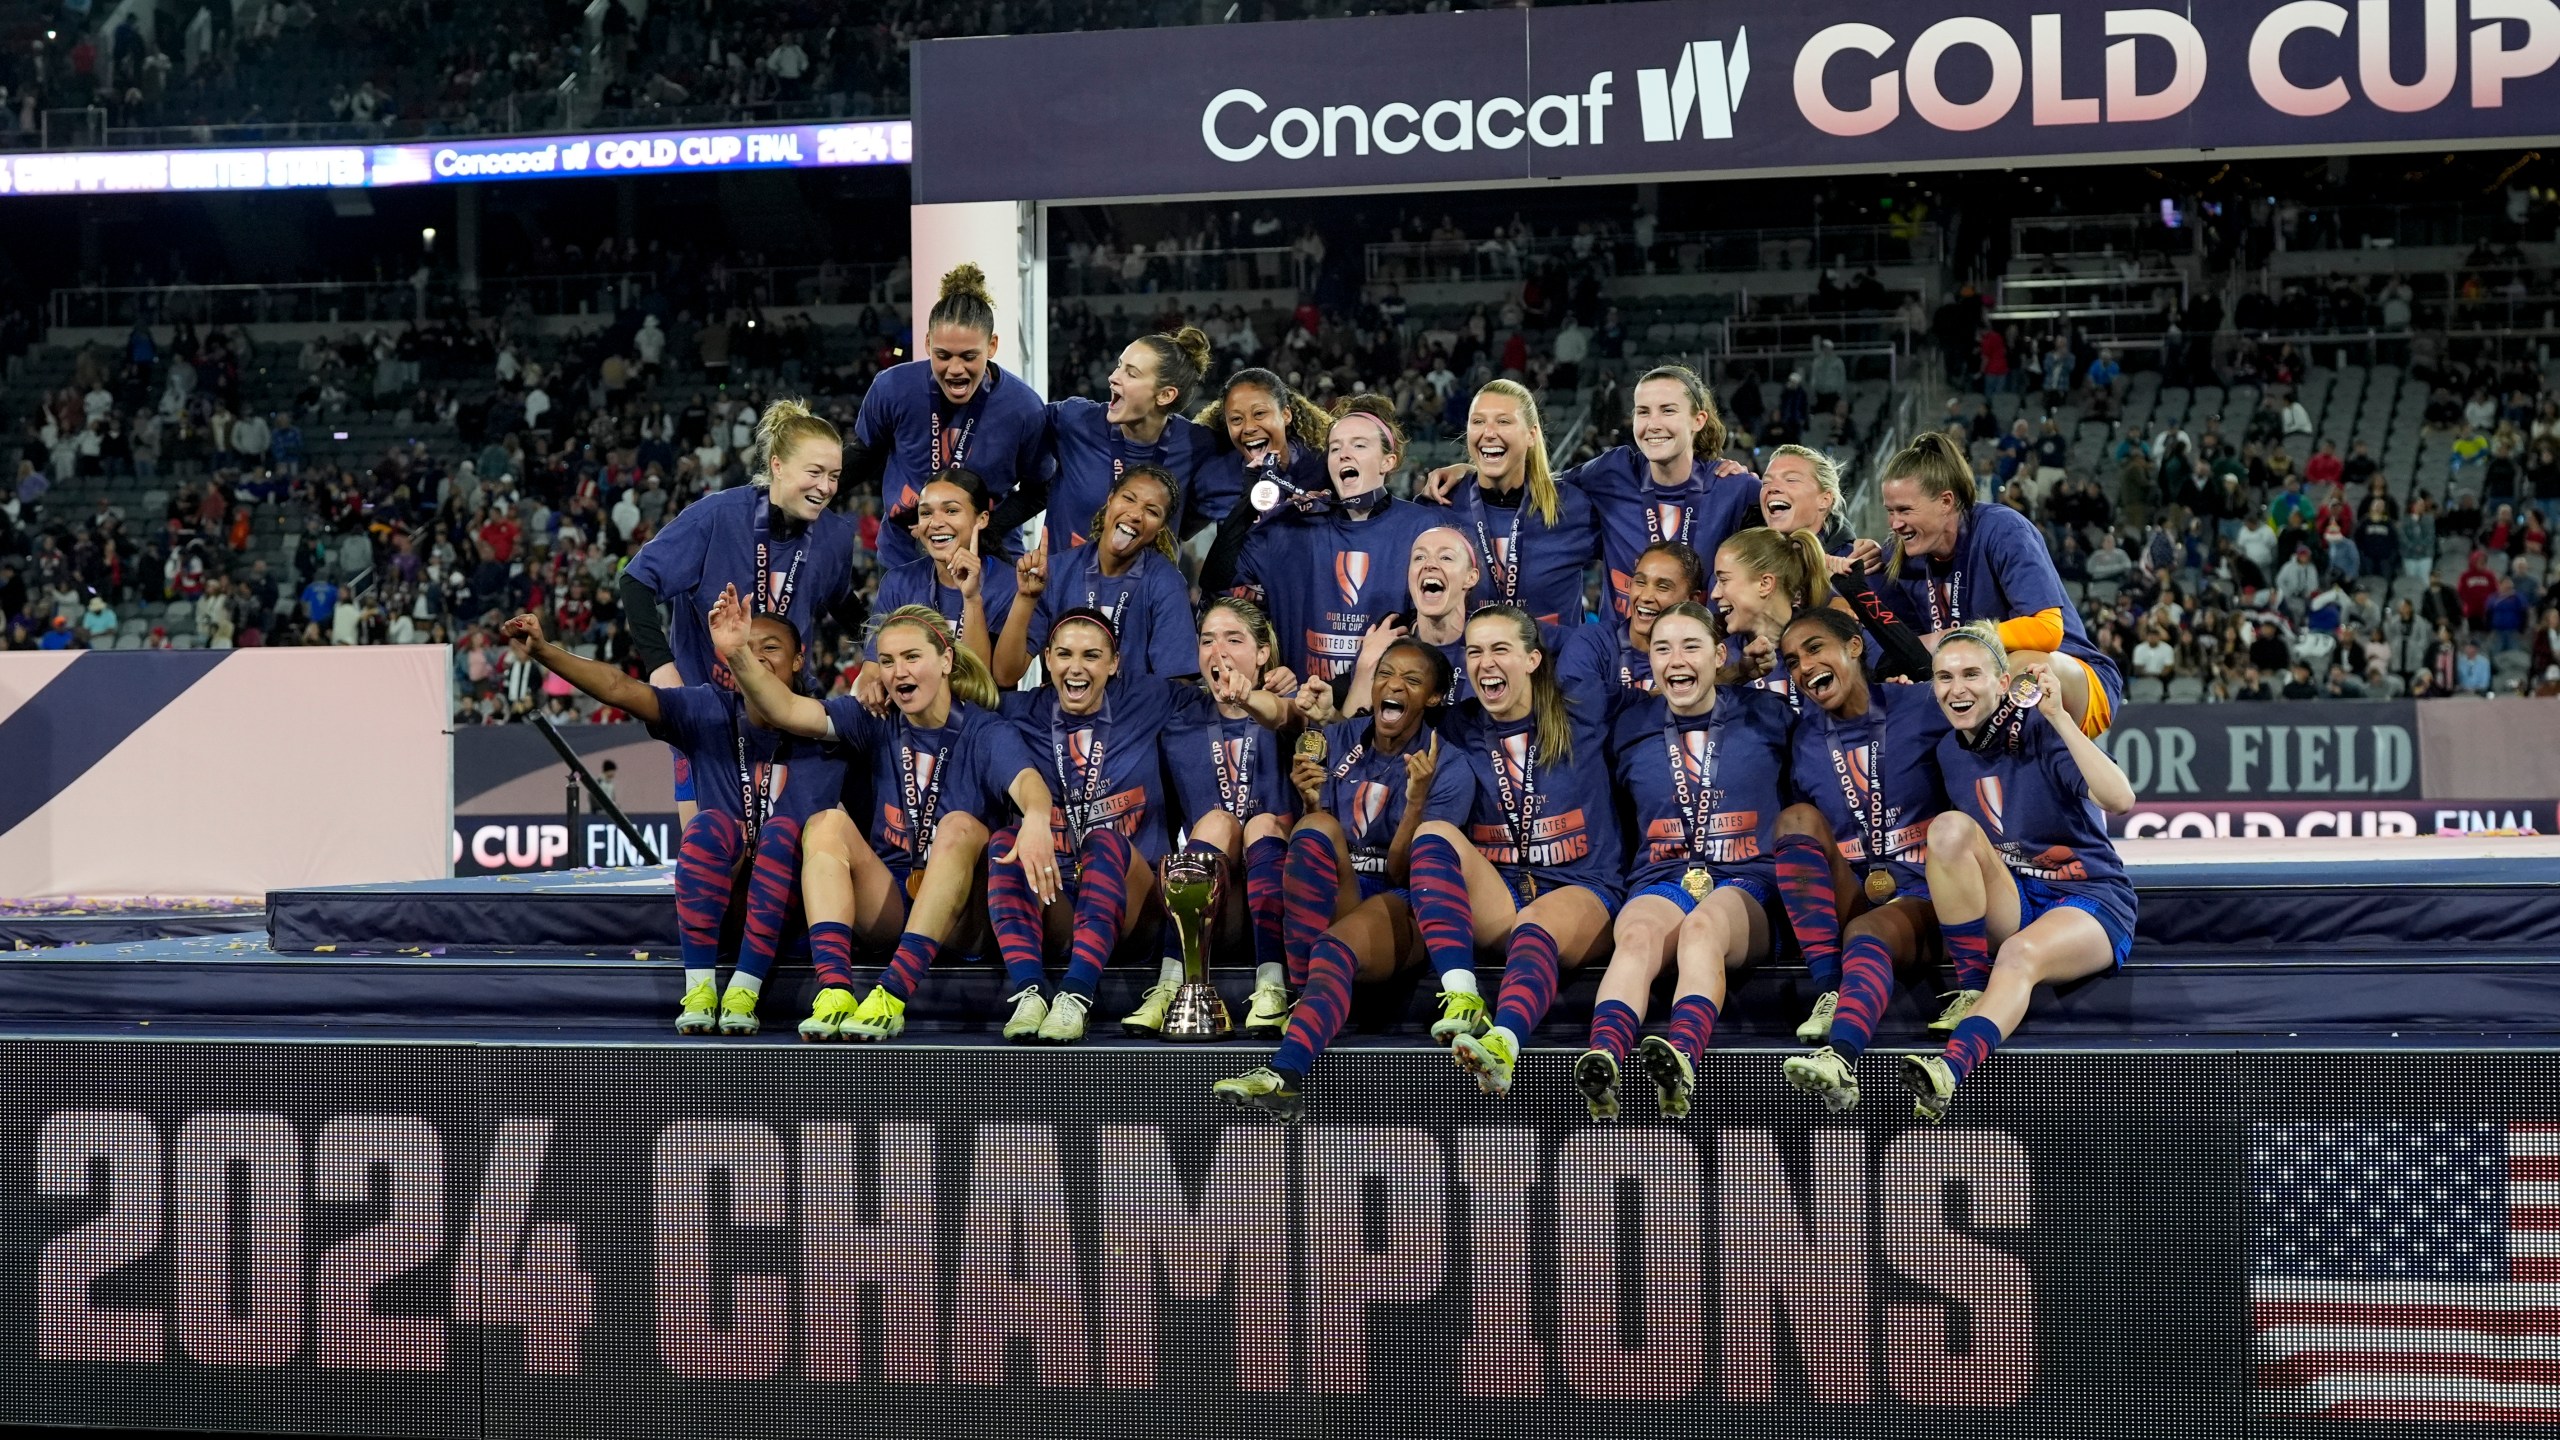 Members of the the United States team celebrate after defeating Brazil in the CONCACAF Gold Cup women's soccer tournament final match, Sunday, March 10, 2024, in San Diego. (AP Photo/Gregory Bull)